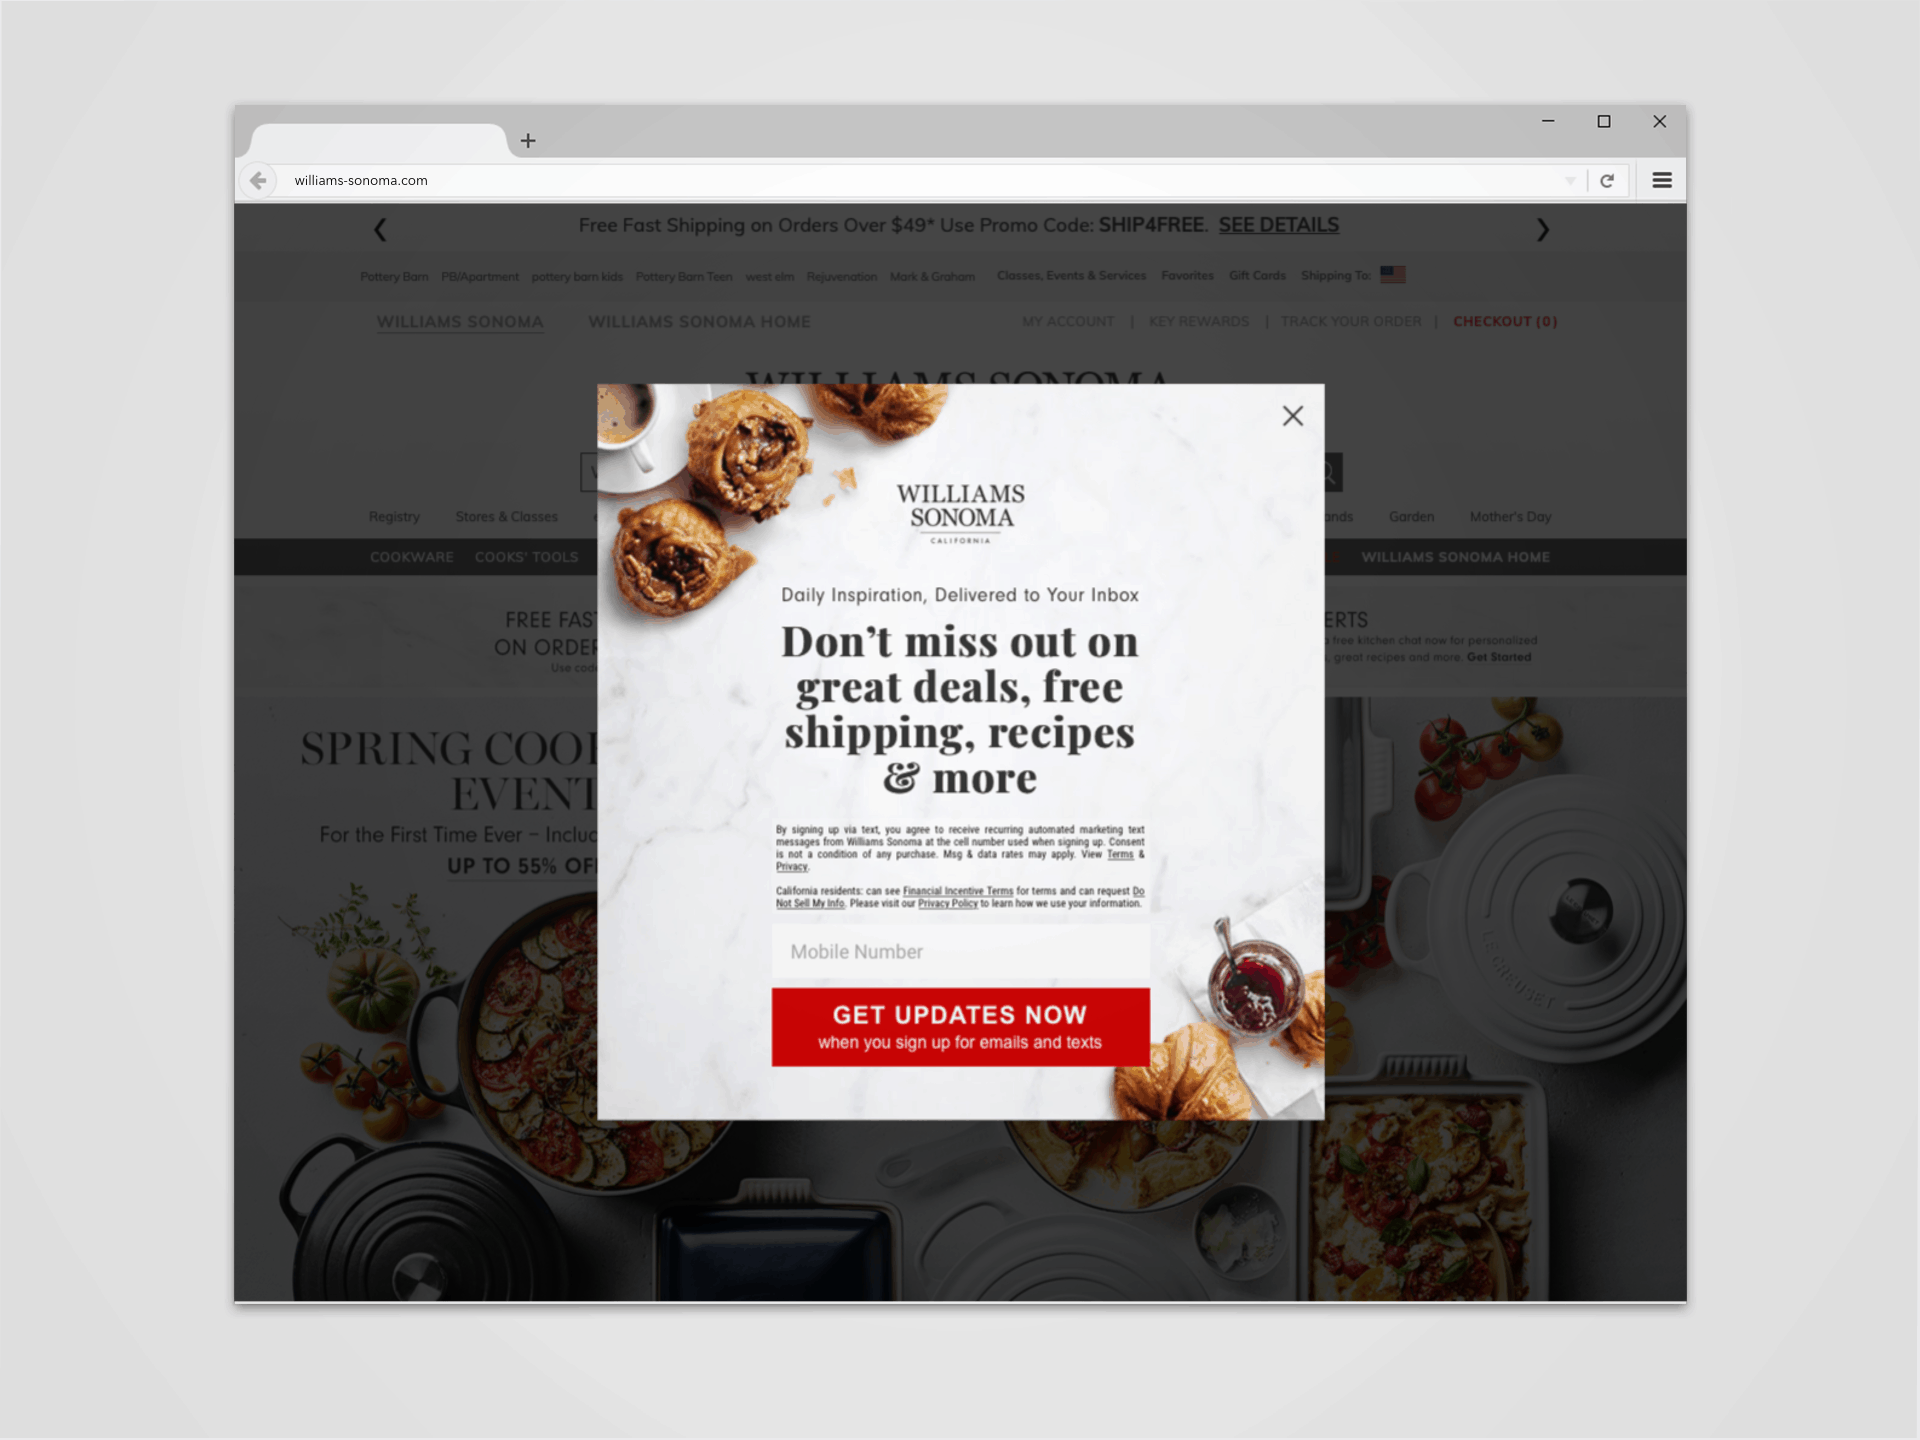 Williams Sonoma Advertising SMS Marketing Campaign on Website